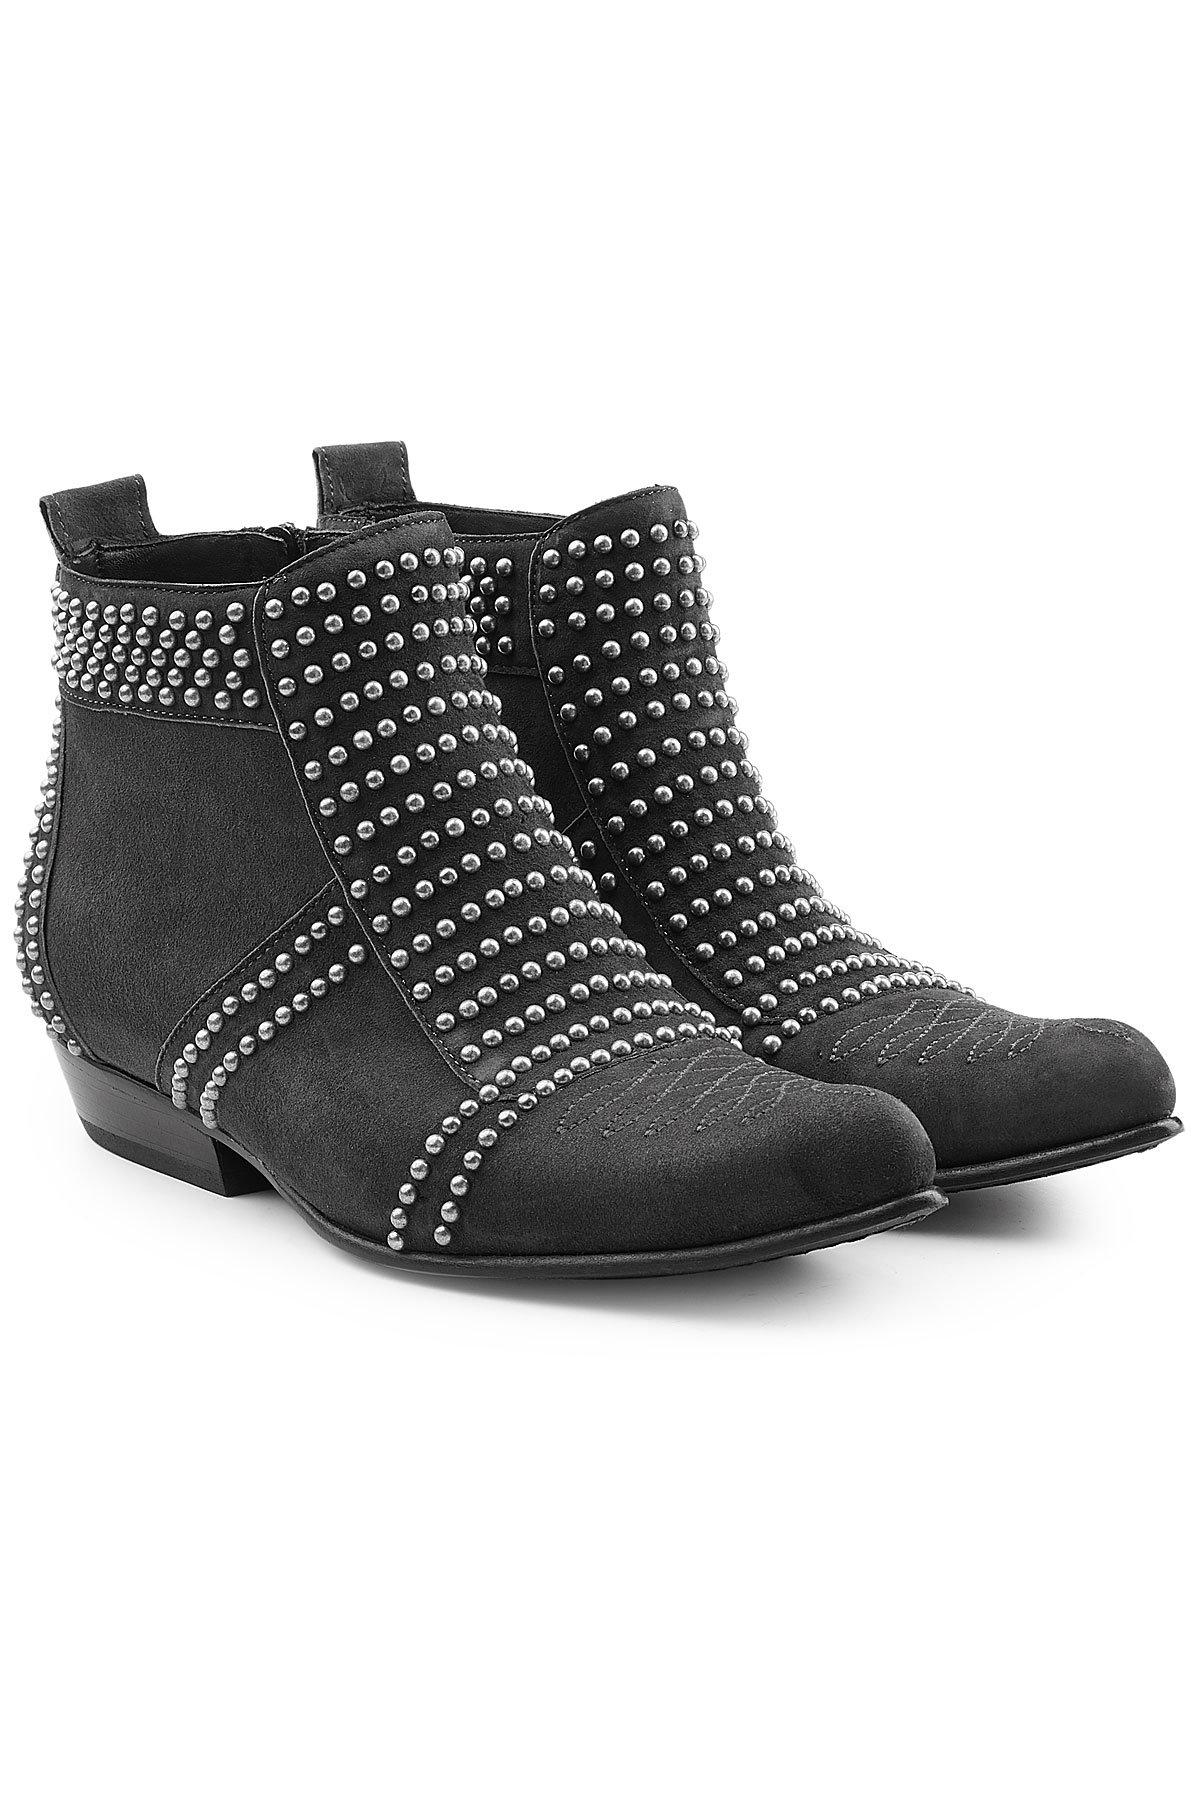 Lyst - Anine Bing Charlie Embellished Suede Ankle Boots in Black